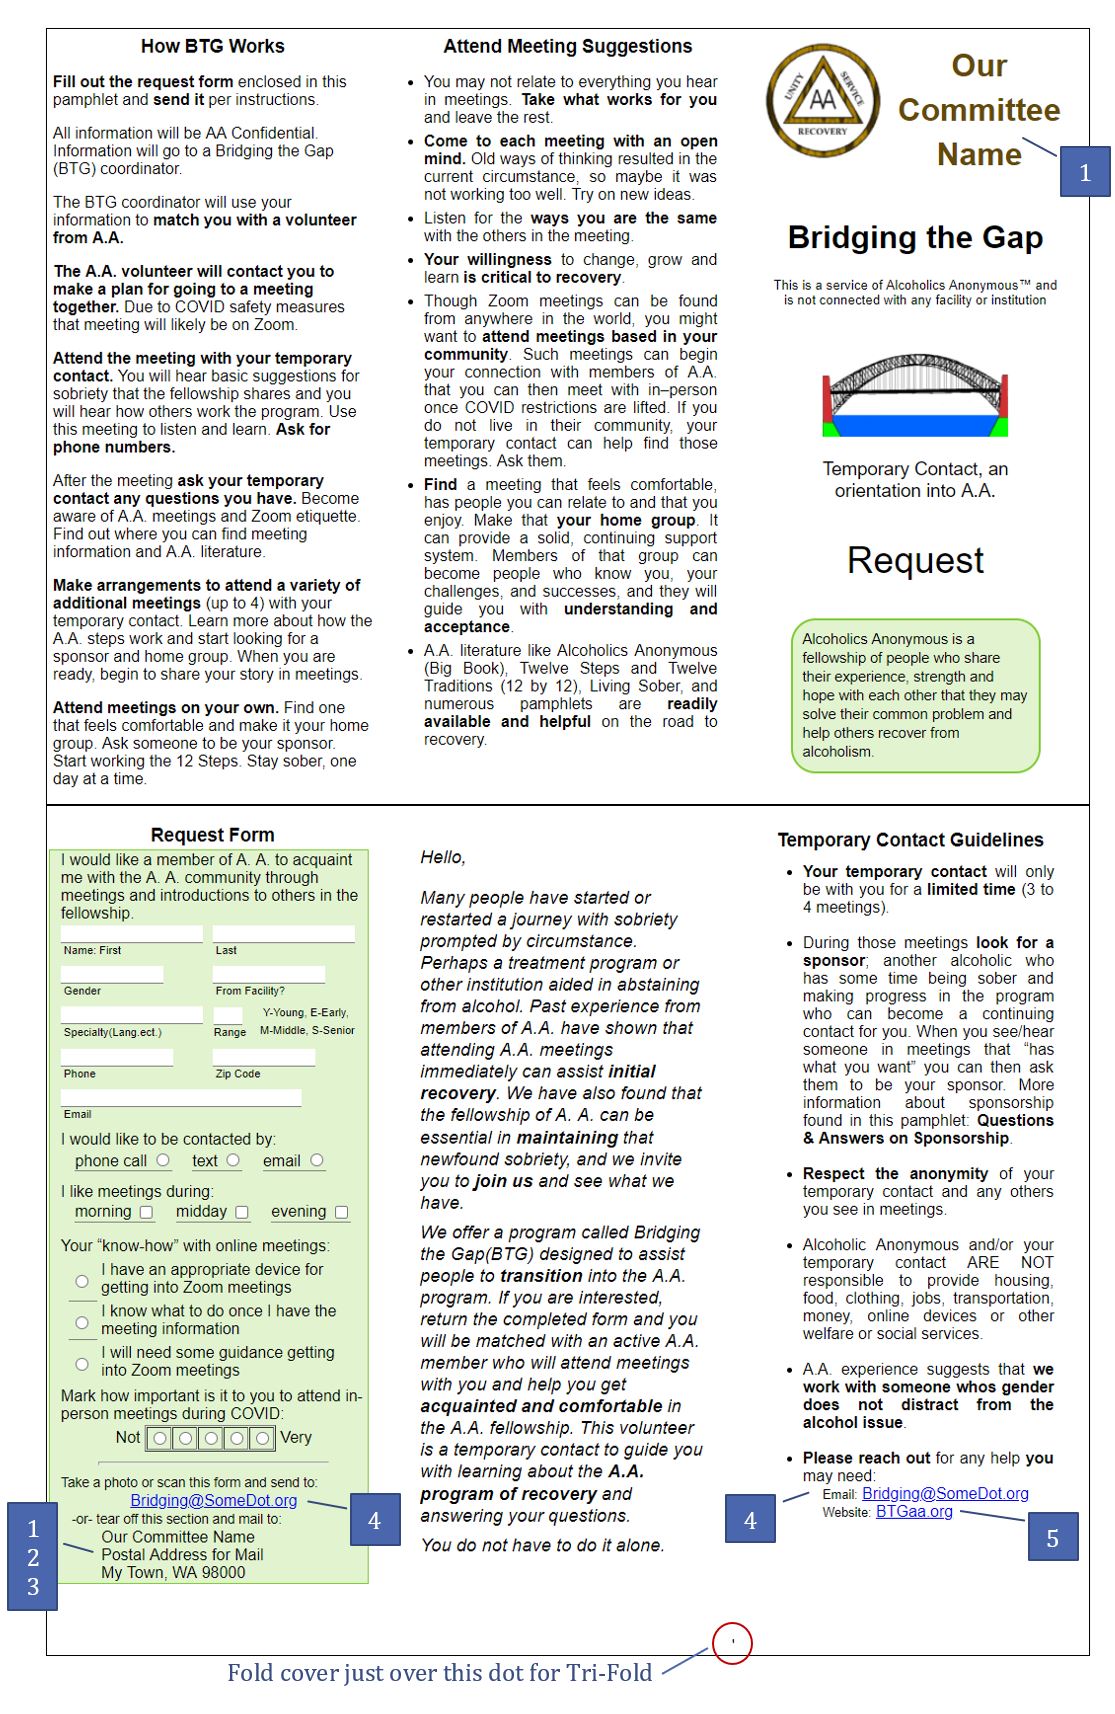 View Pamphlet for field placement